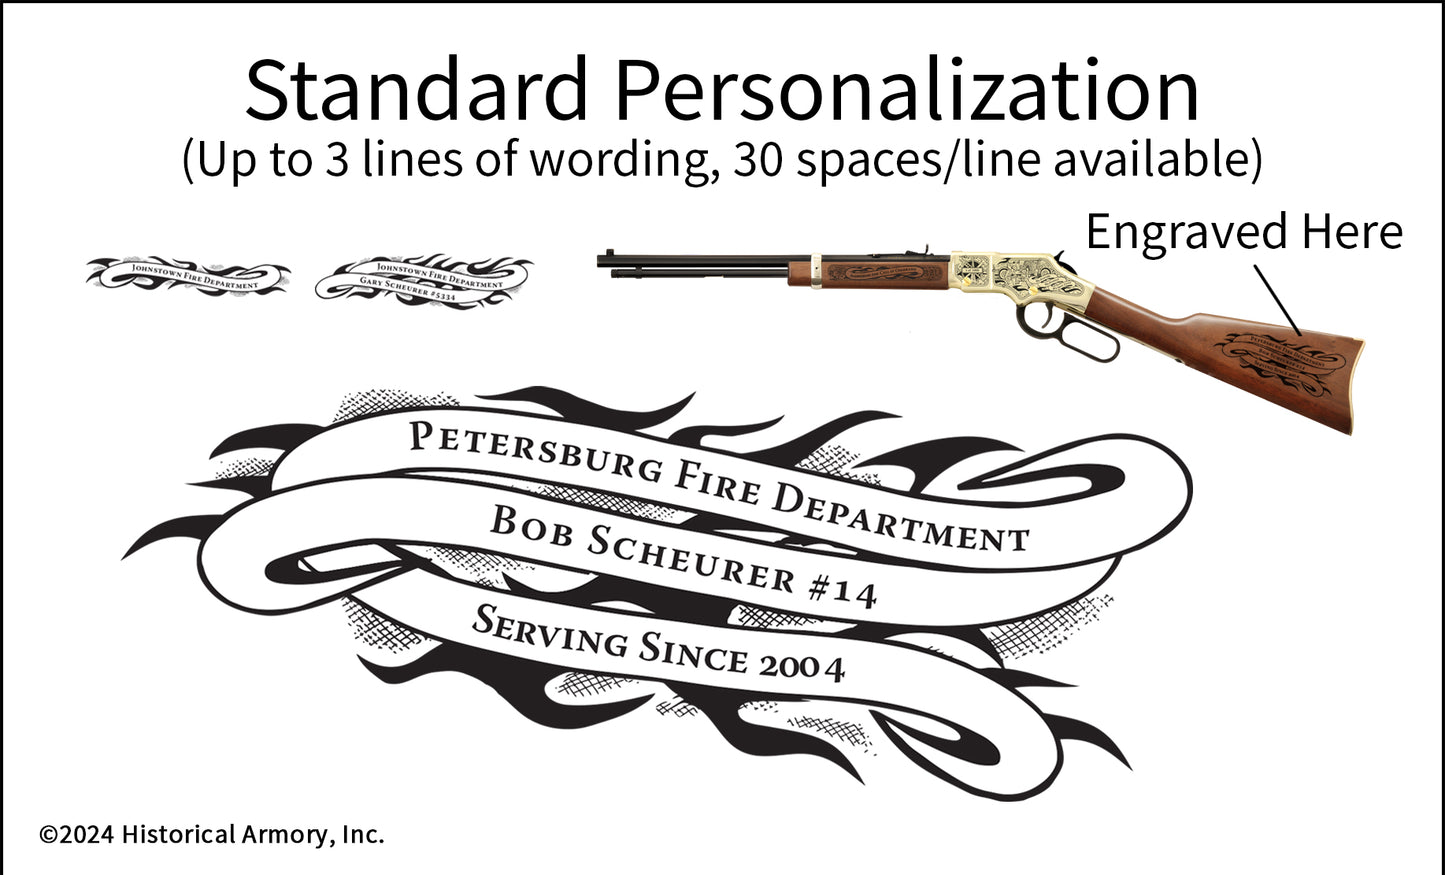 Firefighter Engineer Engraved Rifle Personalization